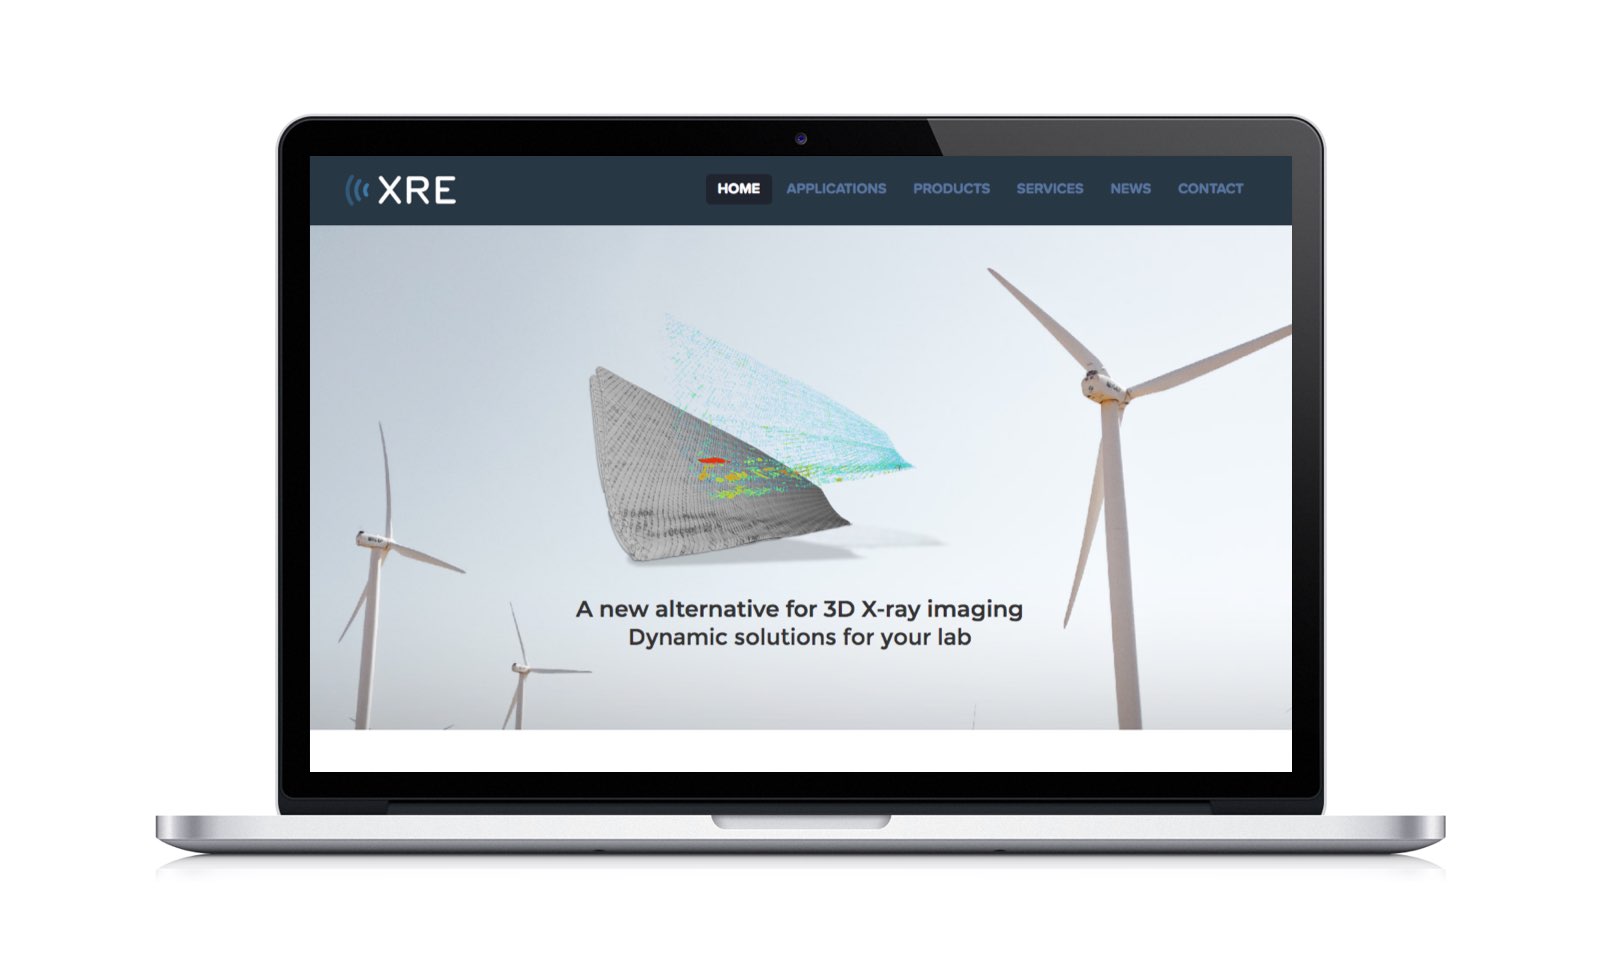 xre mockup website x ray scanners